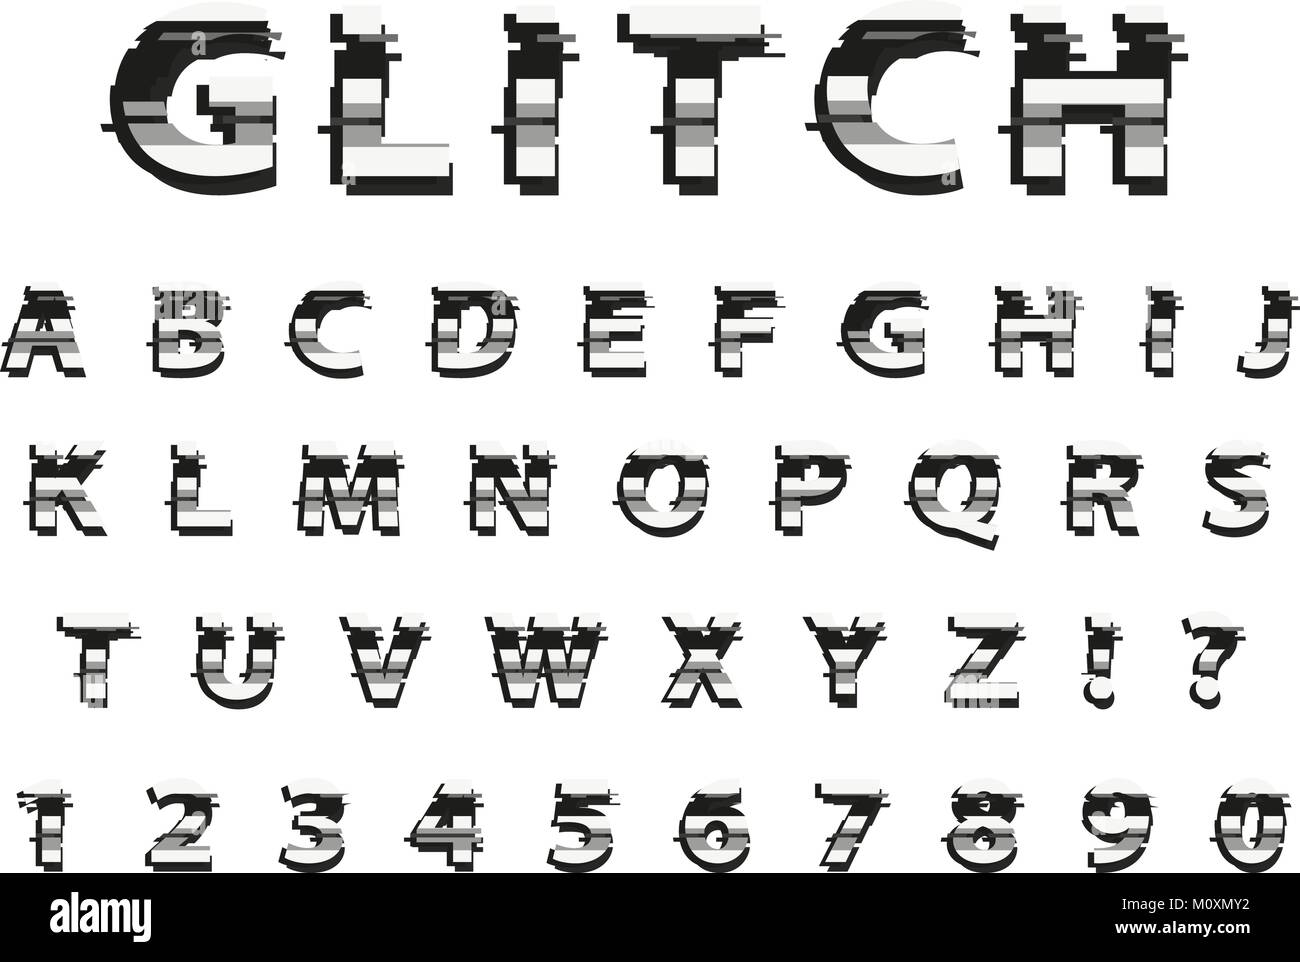 Glitch typography noise font. Lettering typeface distorted style. Trendy alphabet interference Latin letters from A to Z. Isolated on white background. Vector illustration. Stock Vector